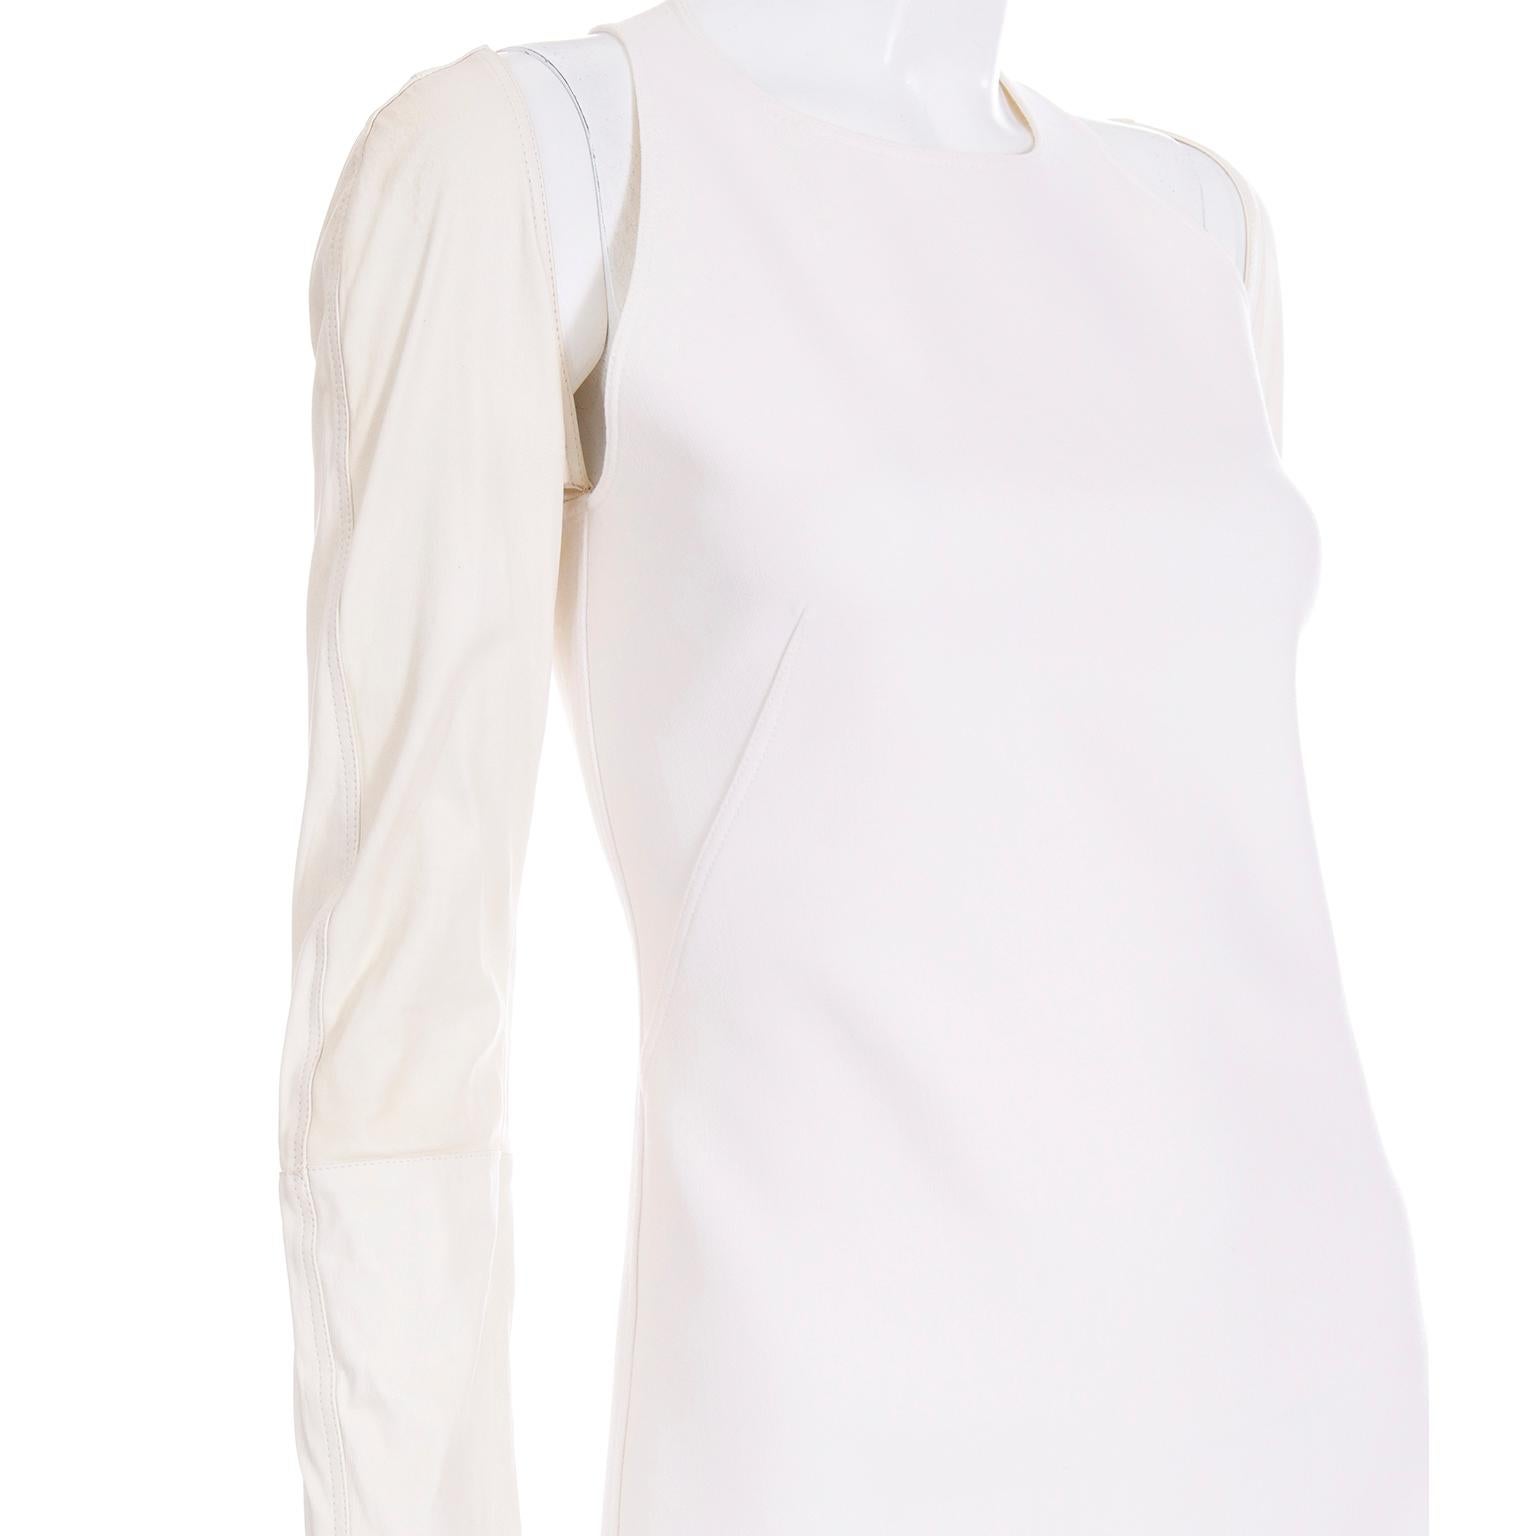 Kaufmanfranco Ivory Crepe Cutout Dress With Cream Lambskin Leather Sleeves In Excellent Condition For Sale In Portland, OR